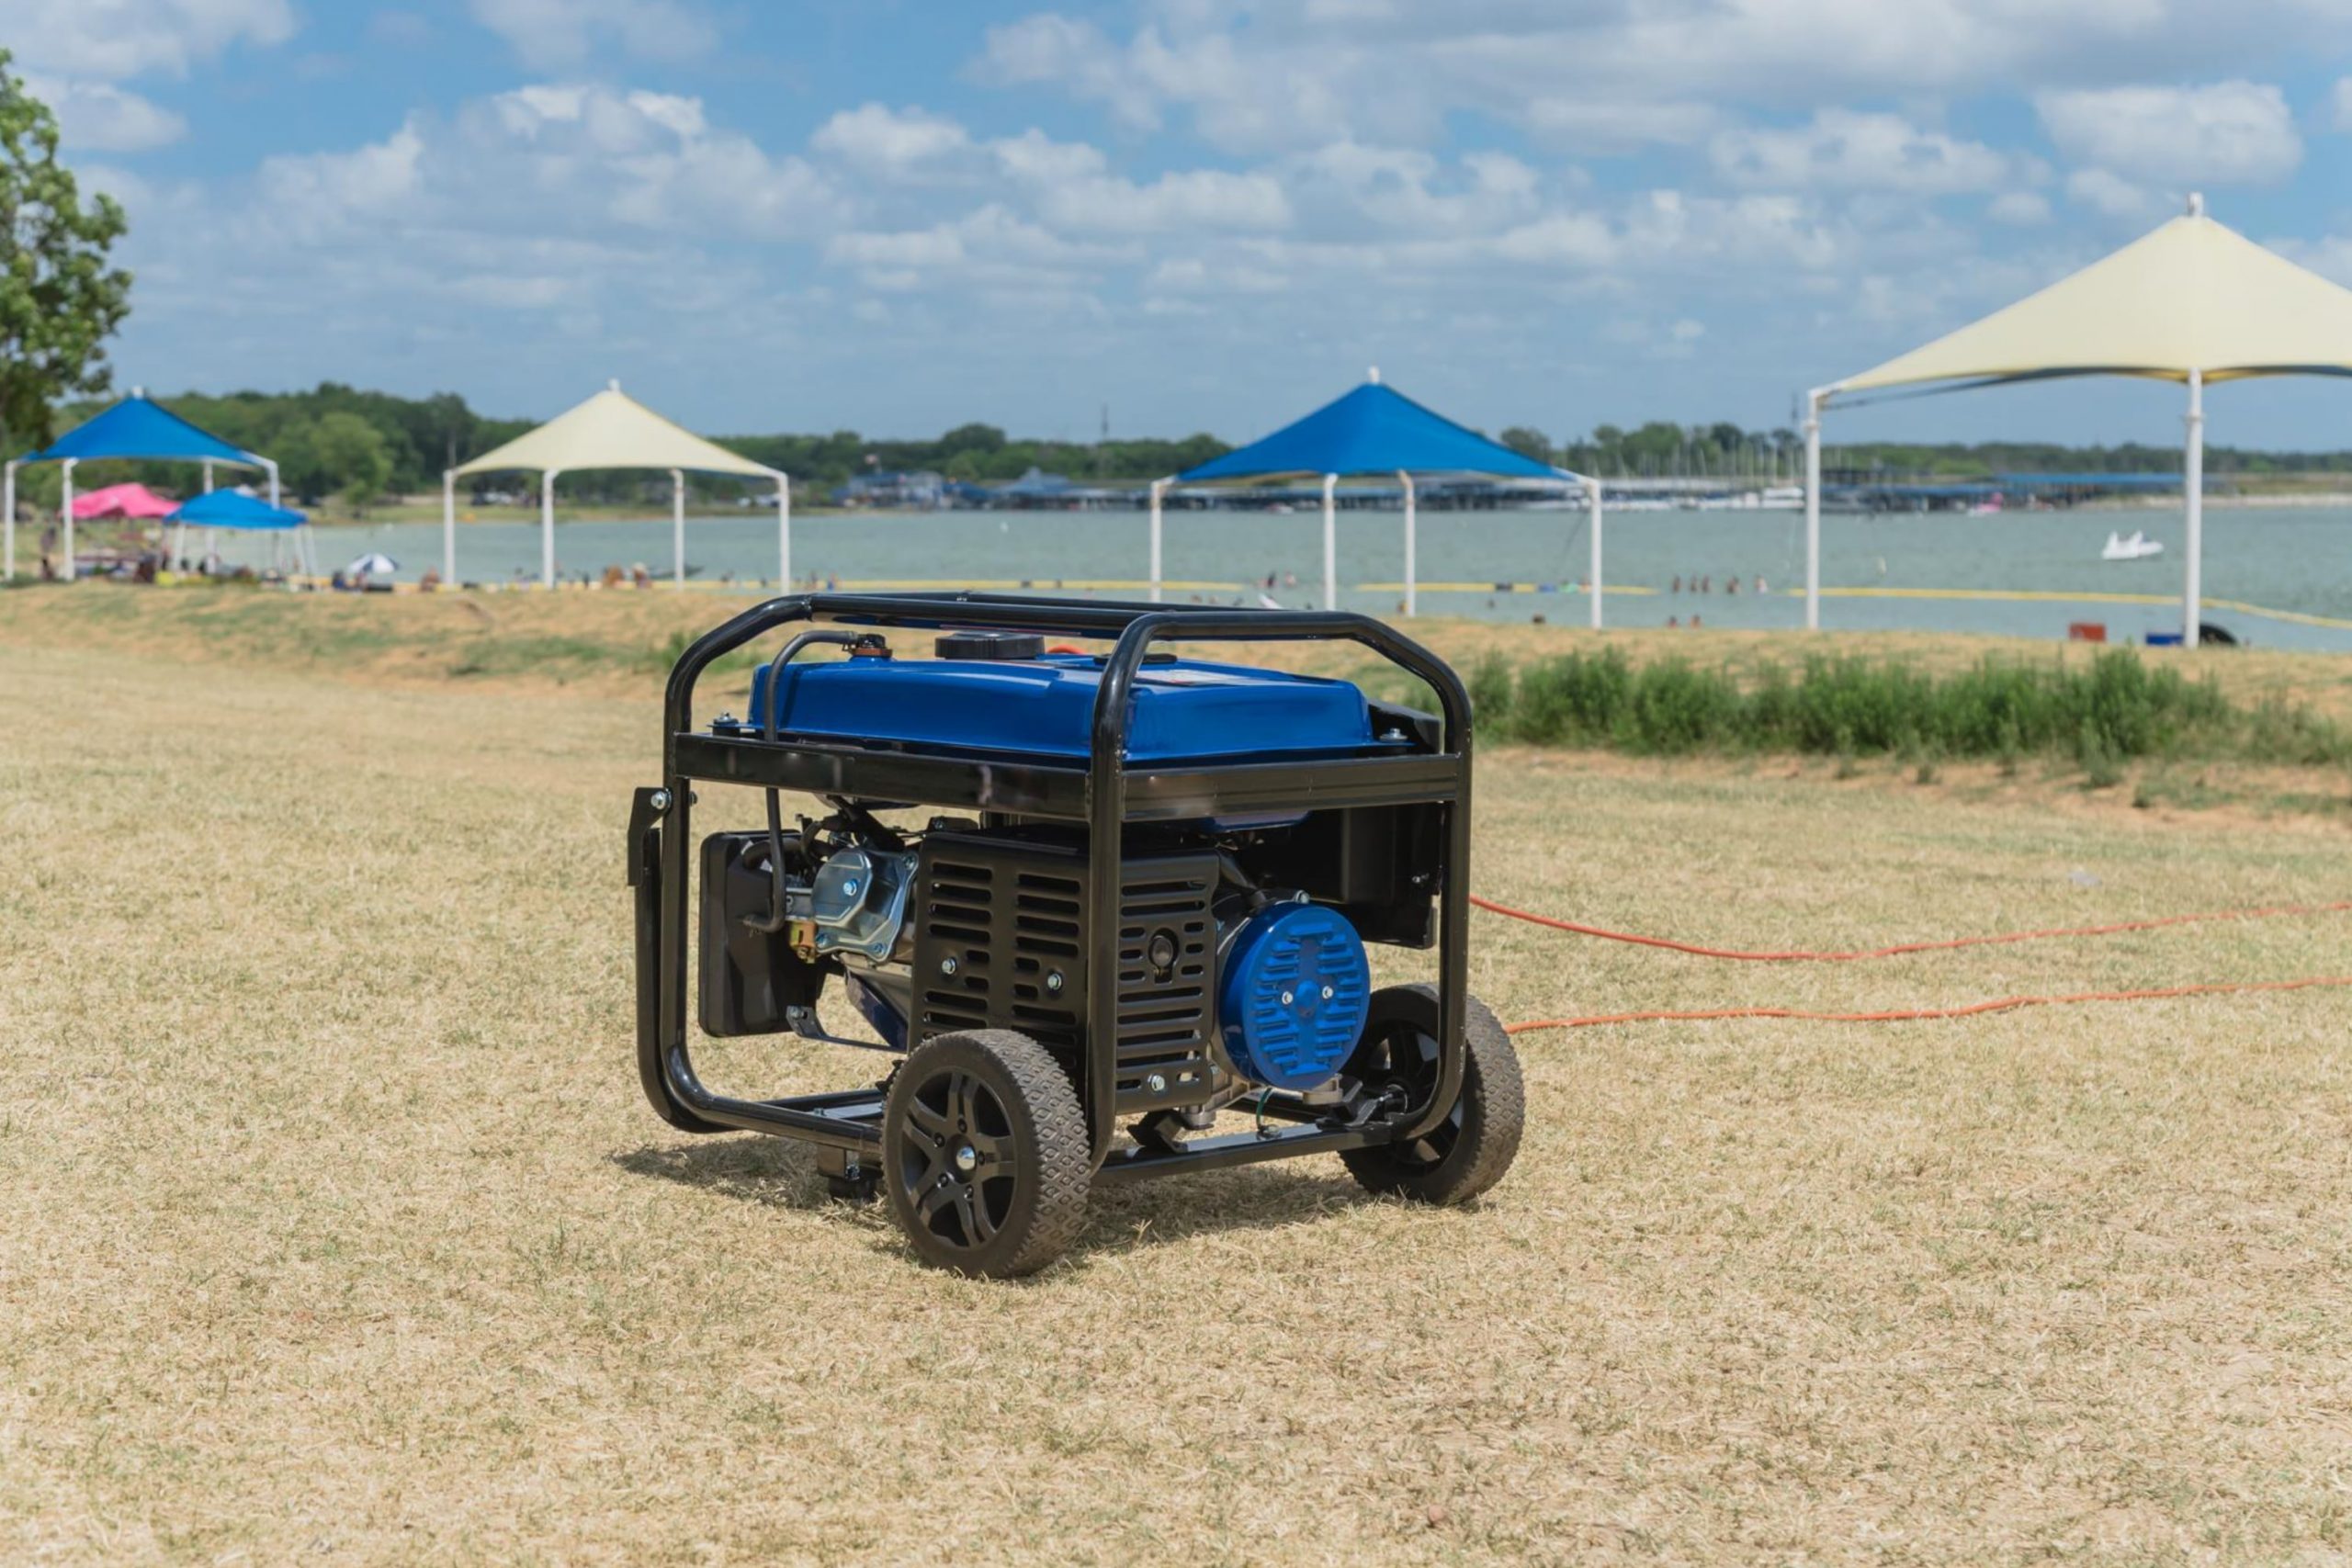 Keep Your Portable Generator Clean And Covered When Not In Use